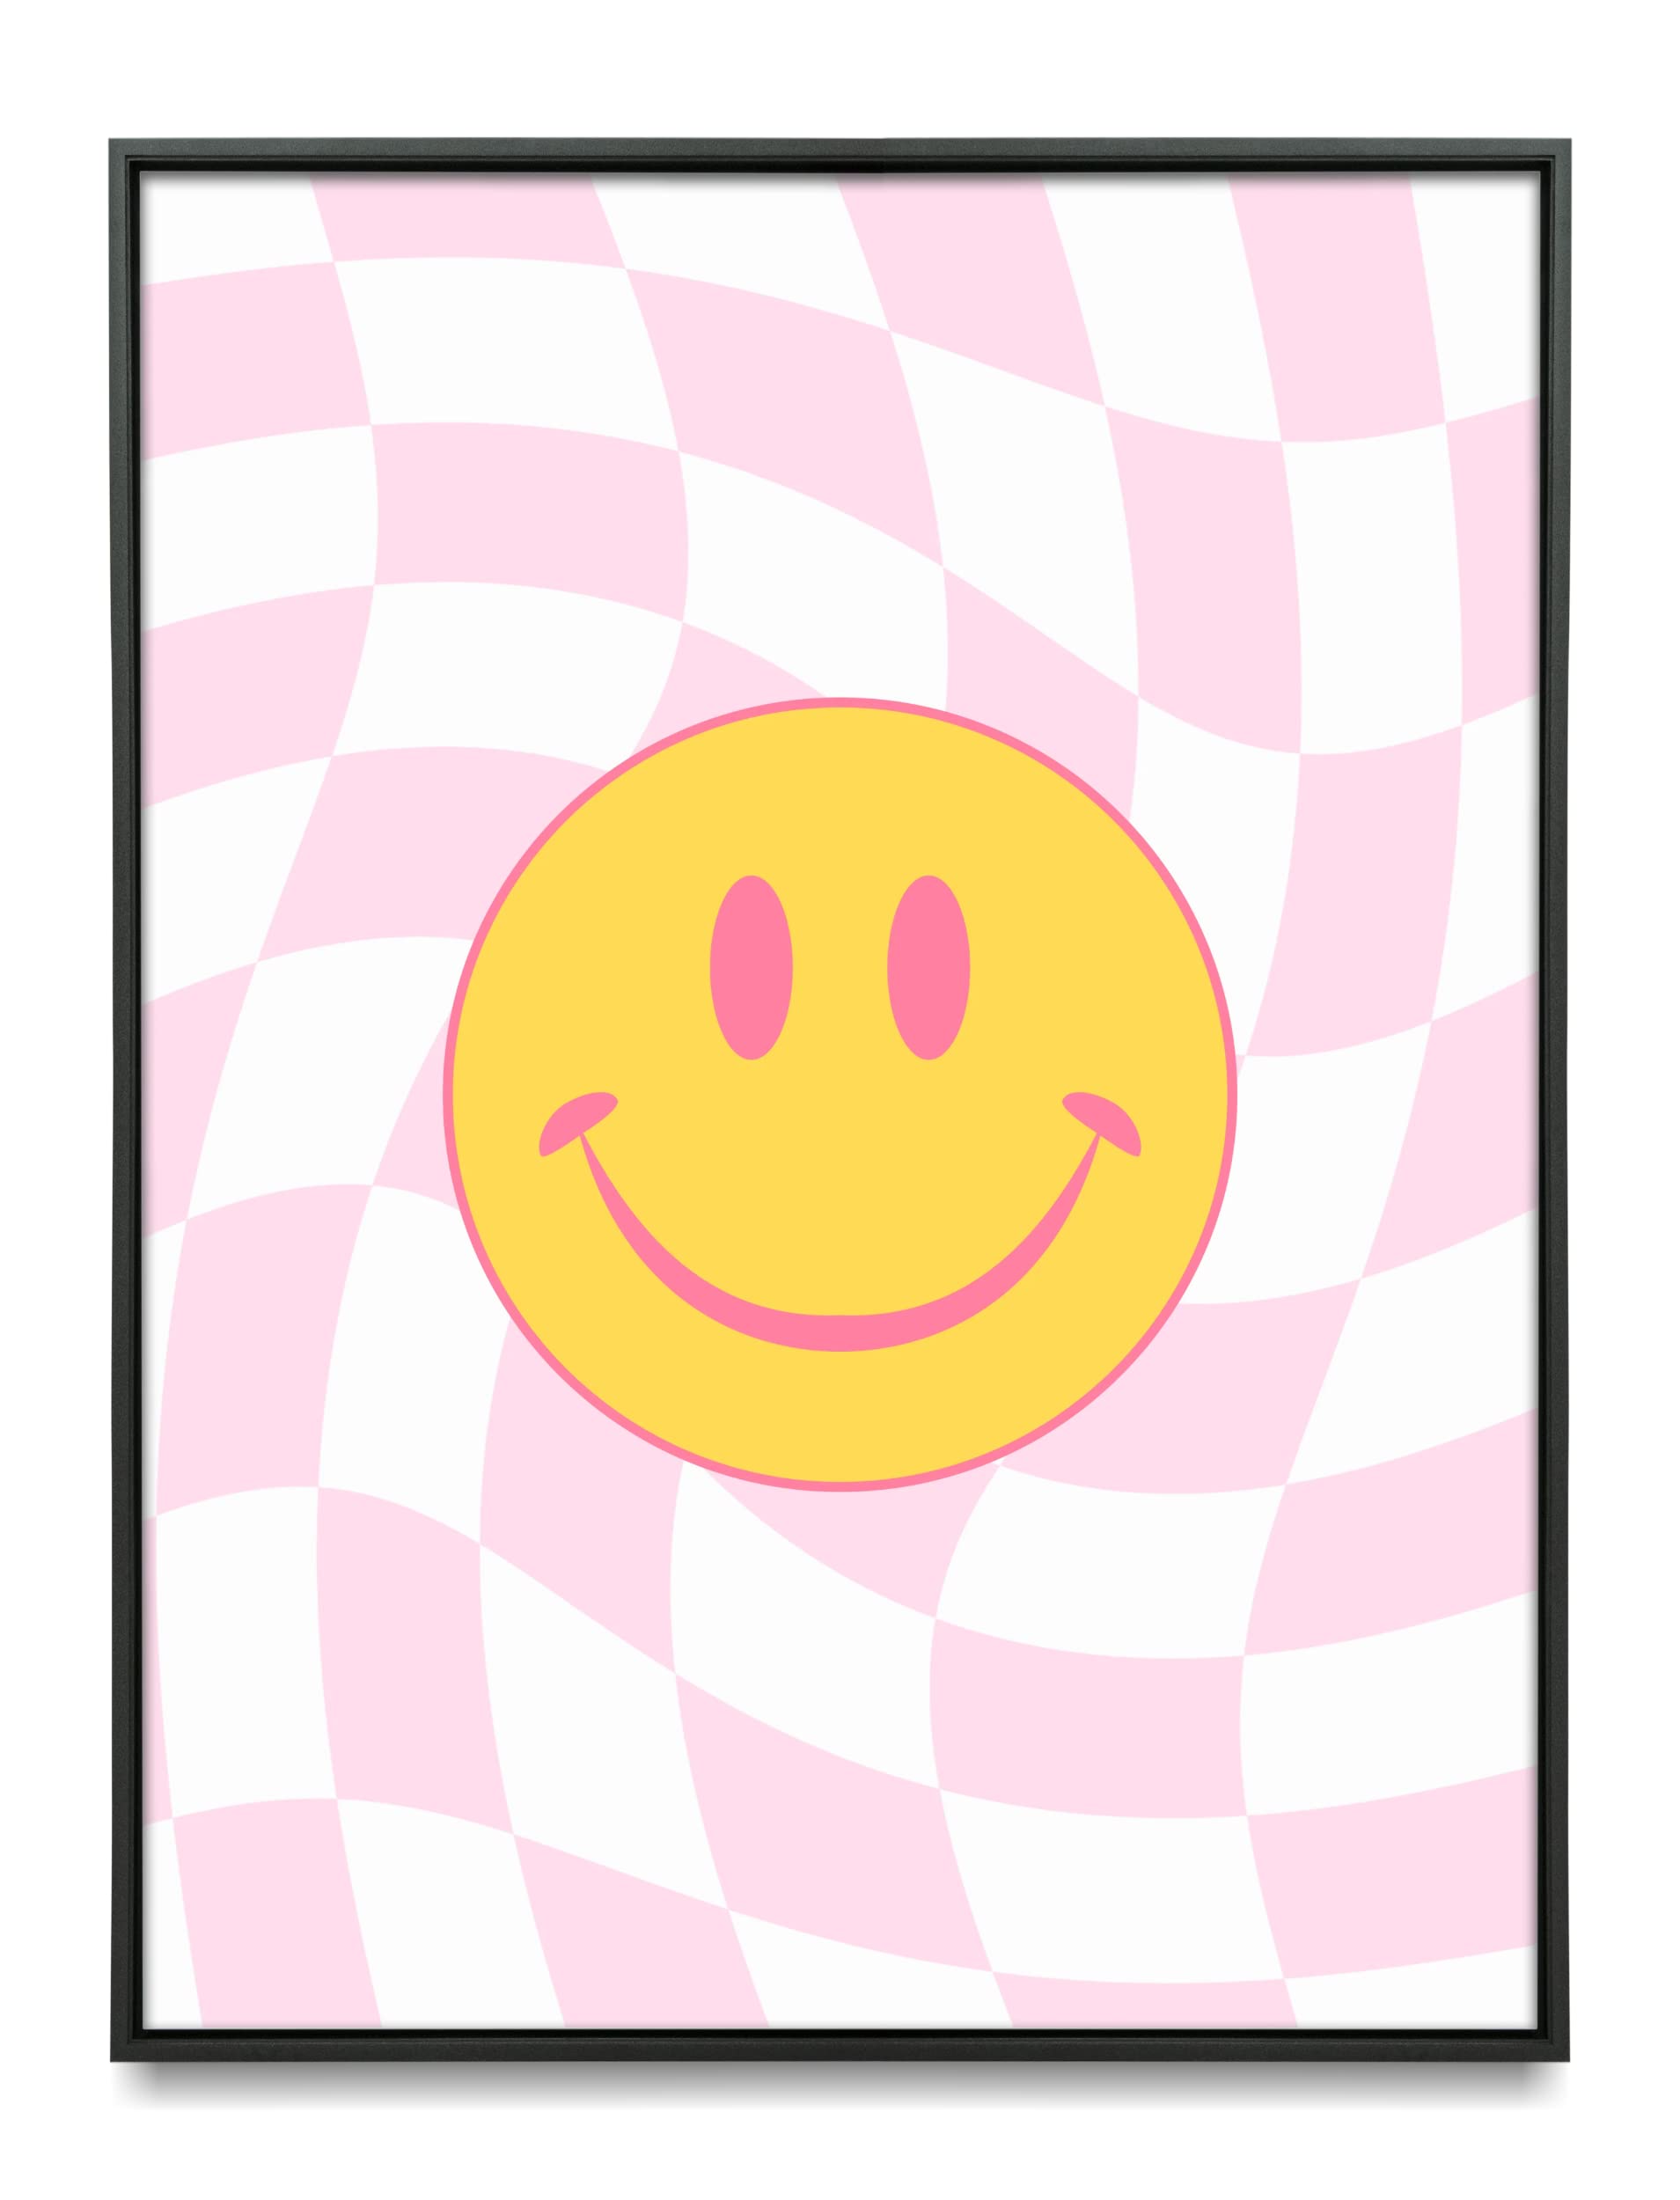 Lotus Atelier Pink Smiley Face Poster for Bedroom. Trippy Posters & Preppy Room Decor